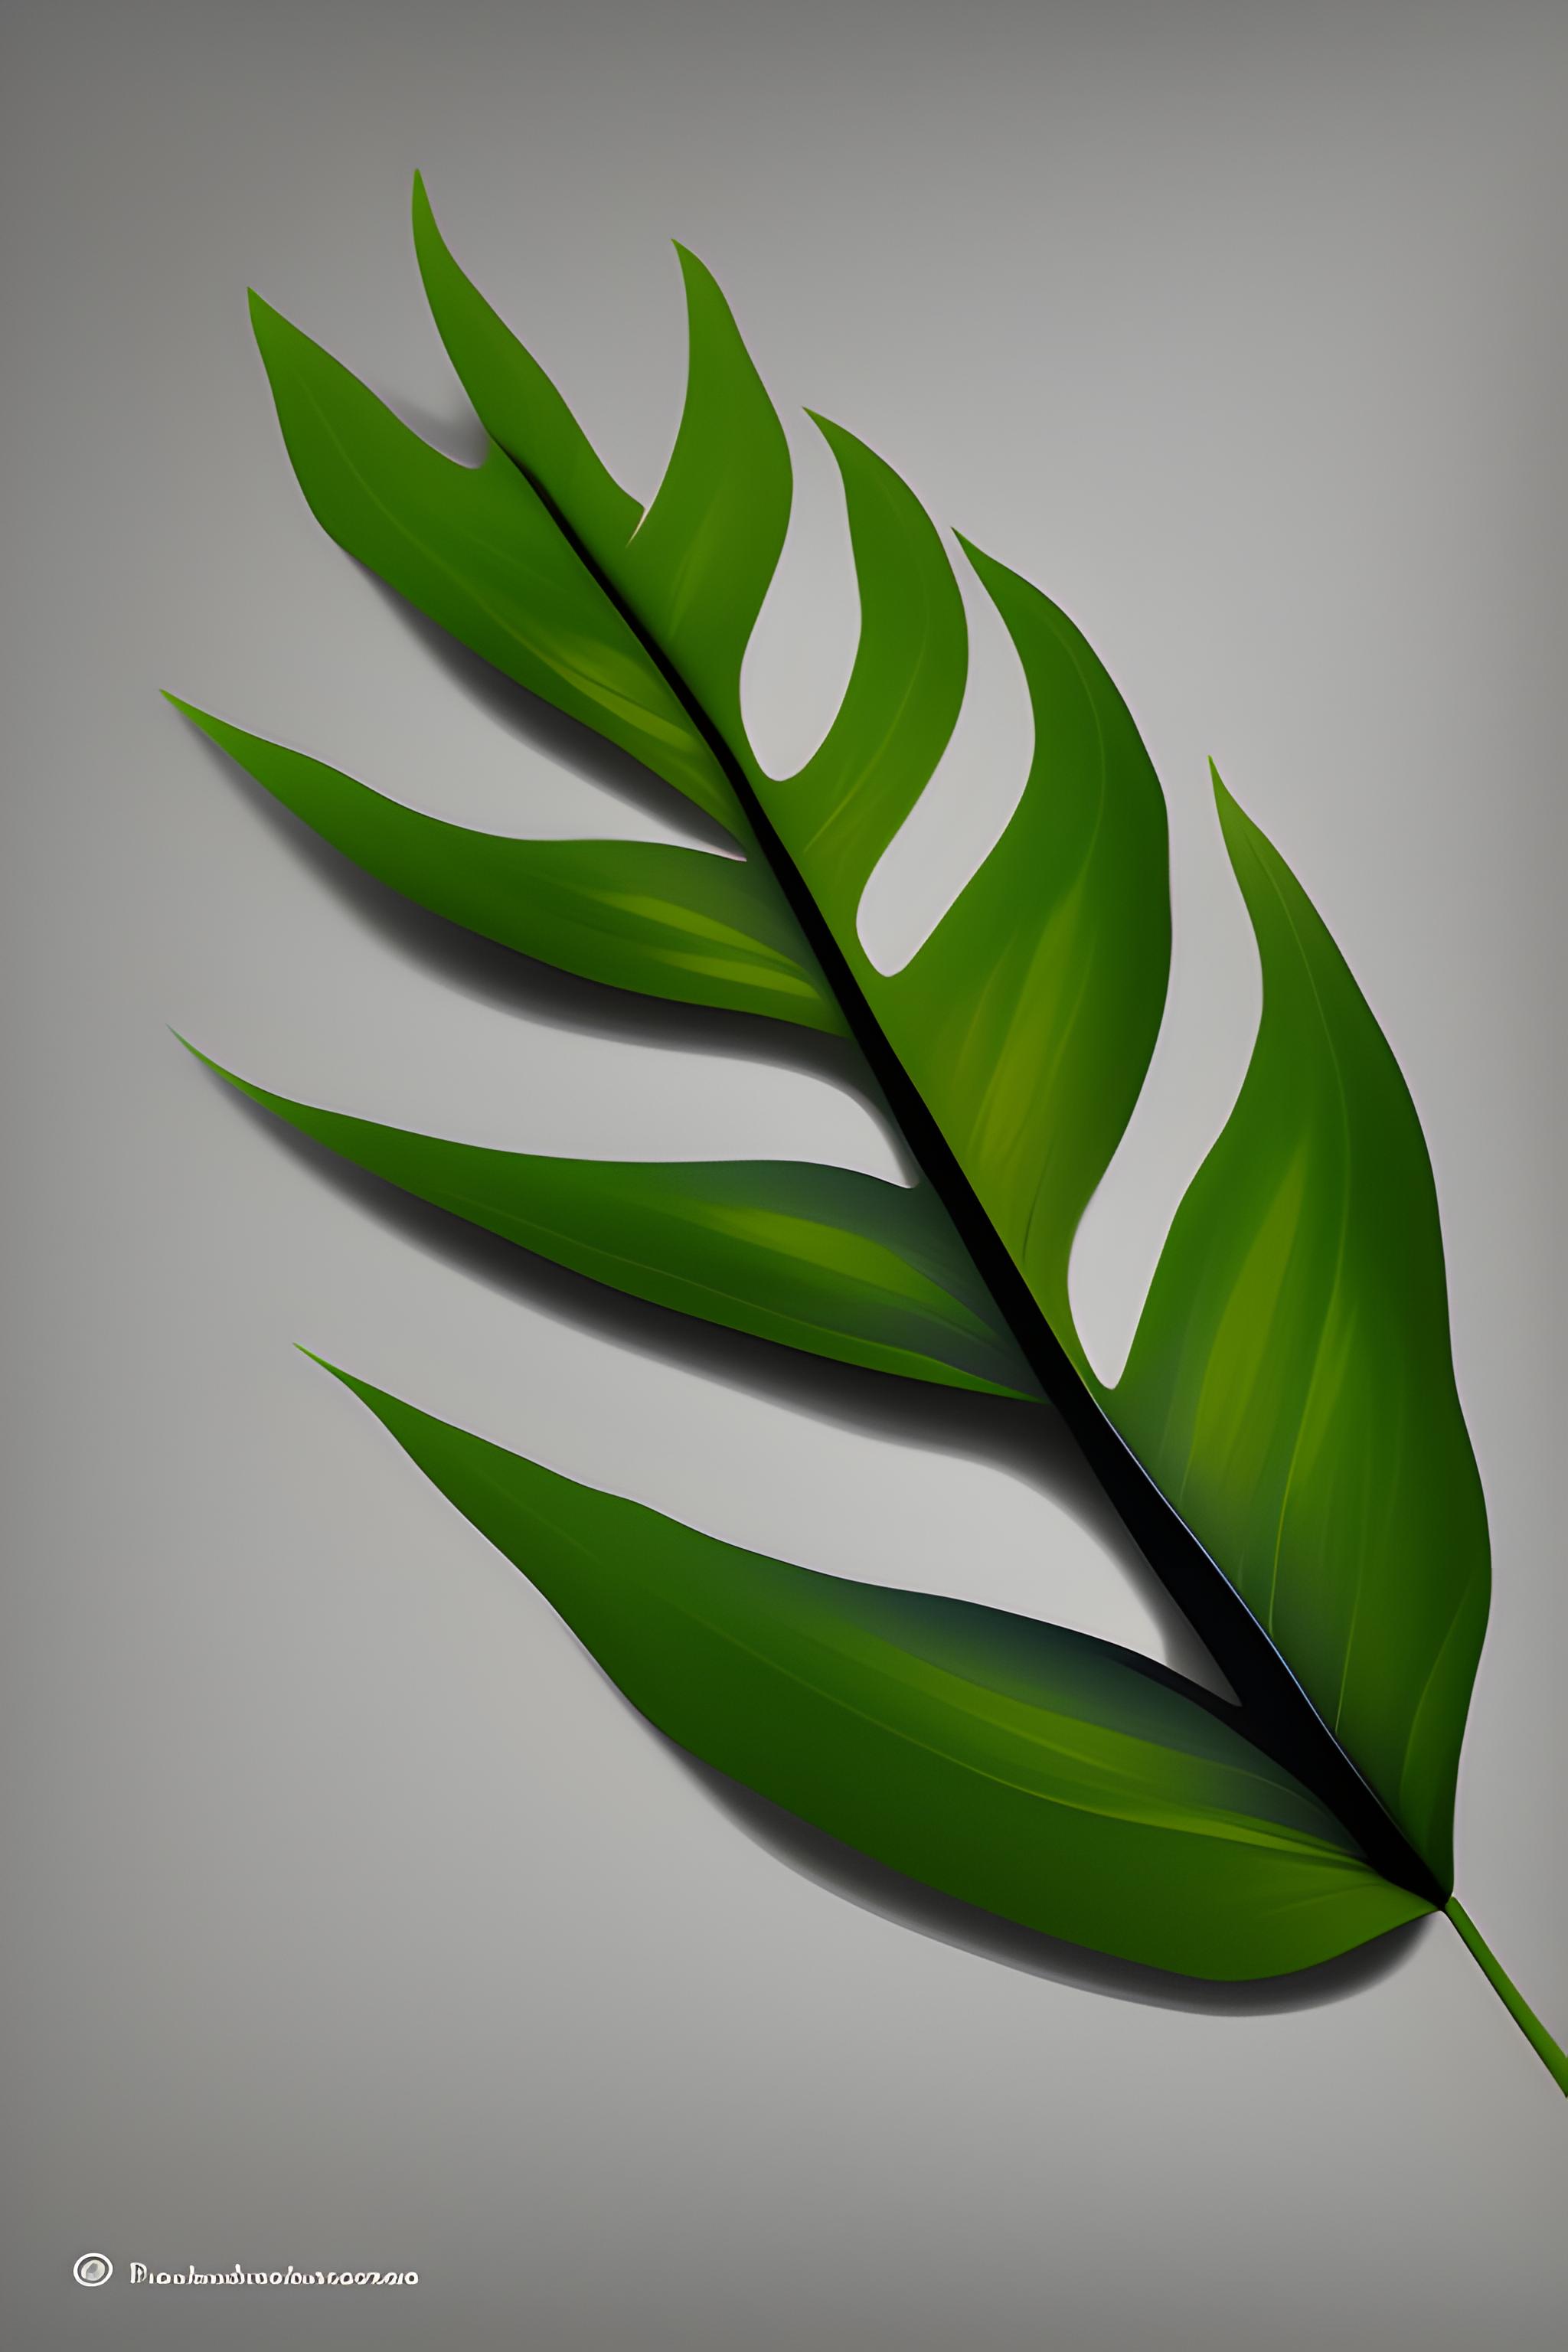 Bambo leaf with black anad white background | Wallpapers.ai